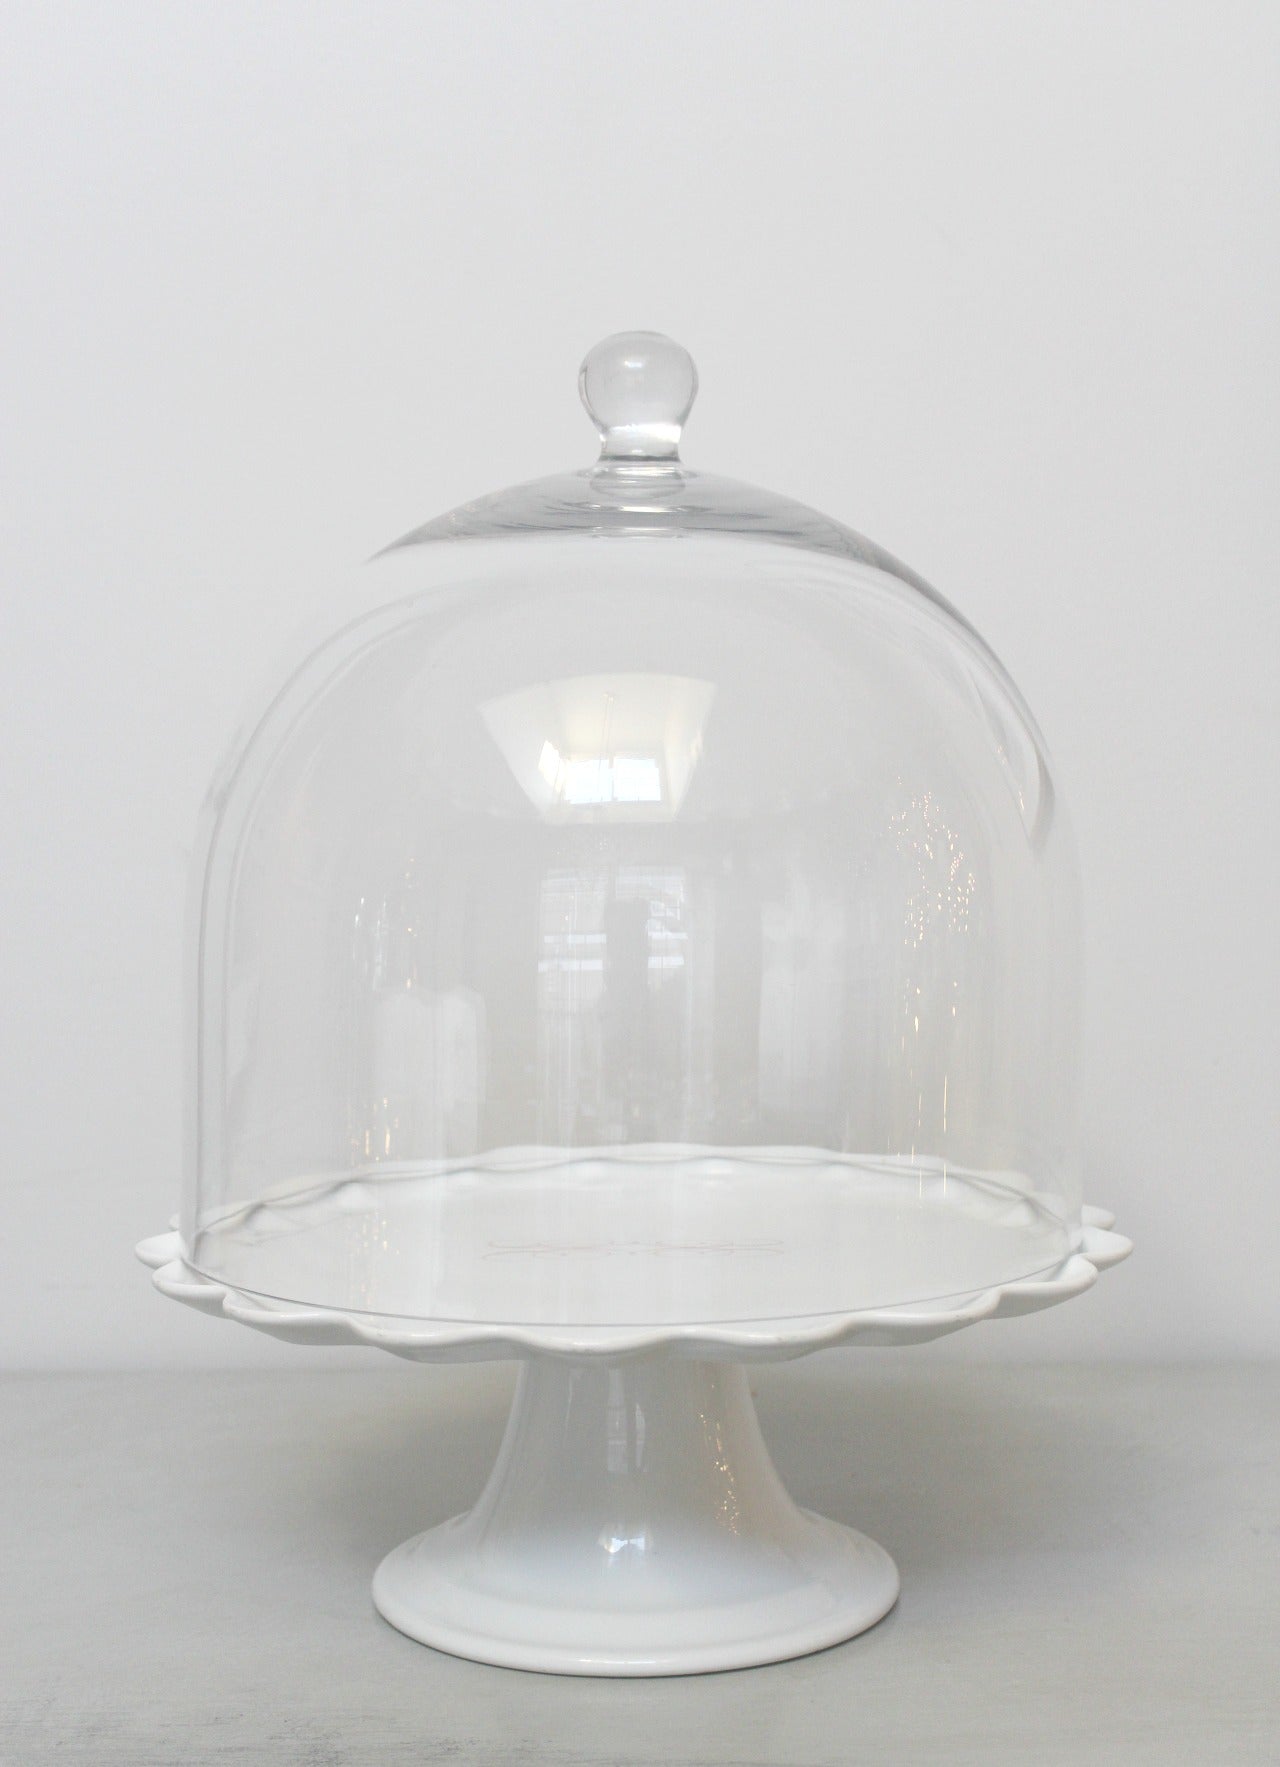 Hand Blown Glass Cake Domes The Cake Bake Shop®